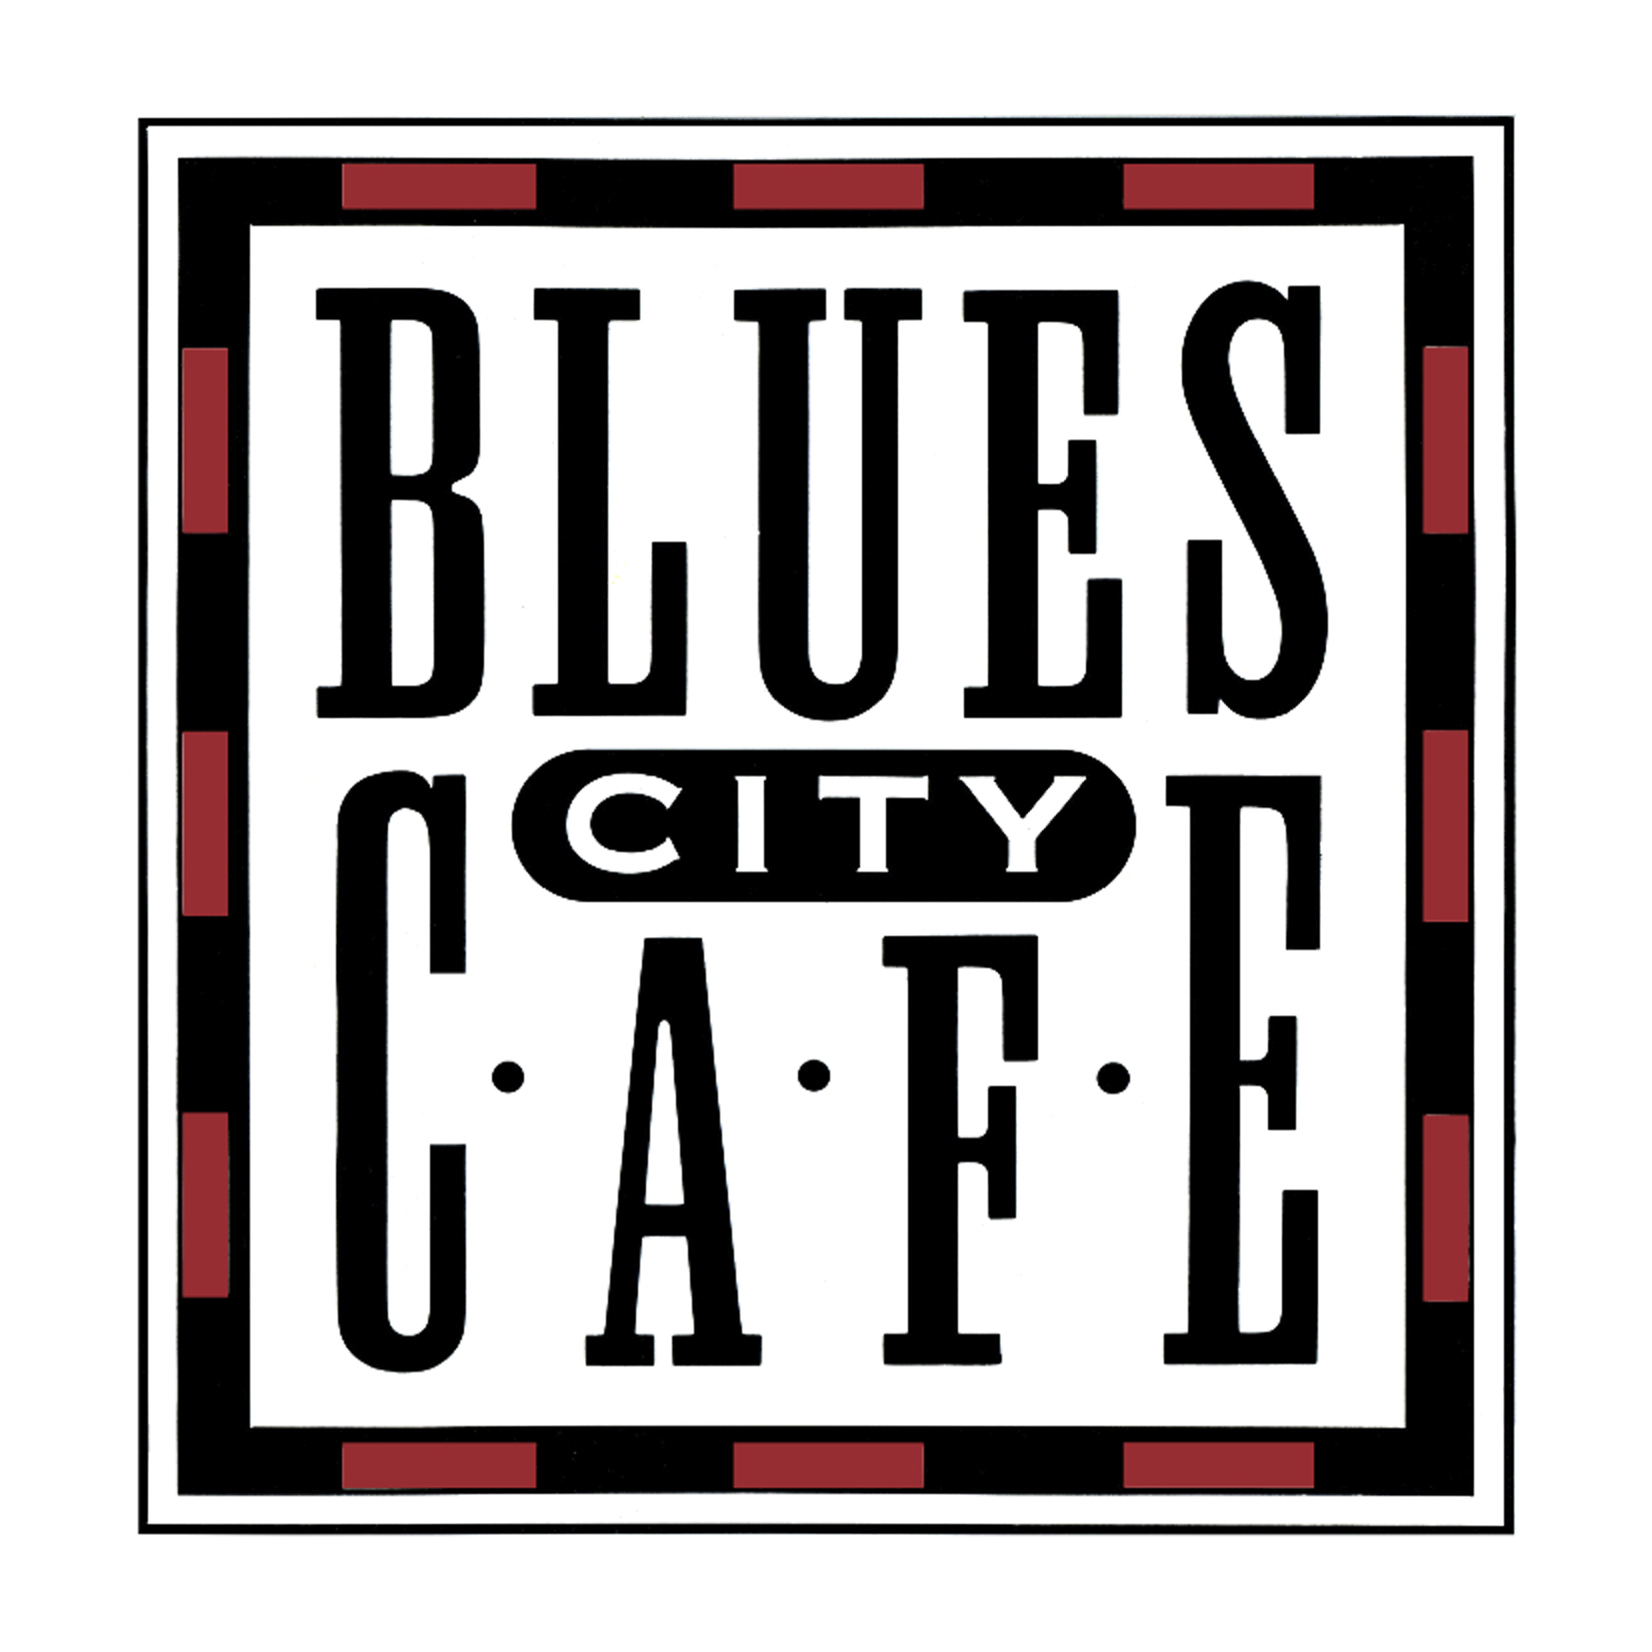  Blues City Cafe logo  Branding creative and design by Chuck Mitchell  Beale Street Memphis, Tennessee 